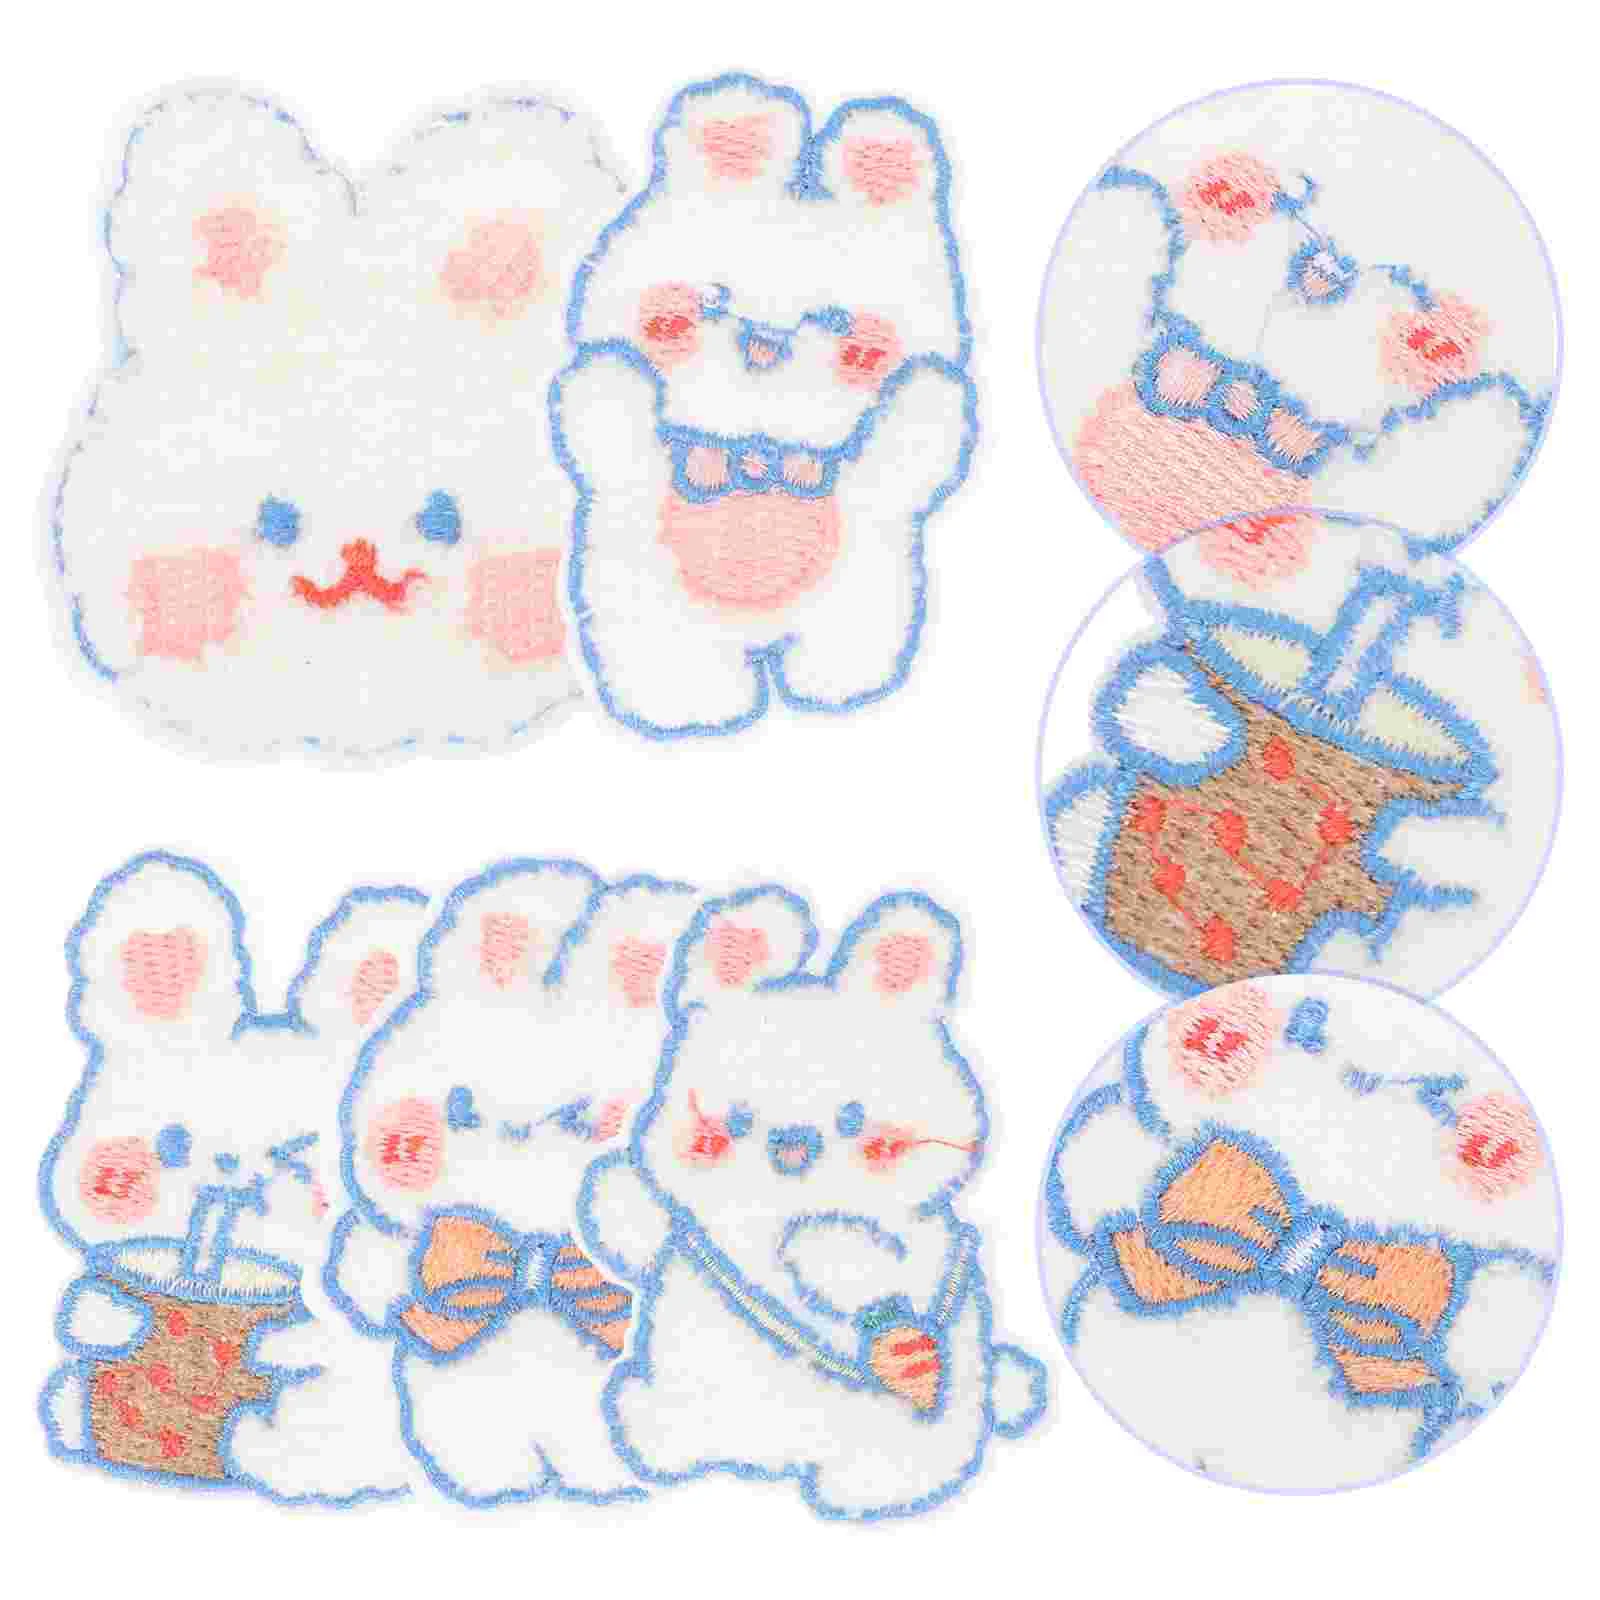 

Patches Patch Bunny Rabbit Iron Easter Applique Embroidered Sticker Stickers Embroidery Sewing Letters Stockings Supplies Fabric